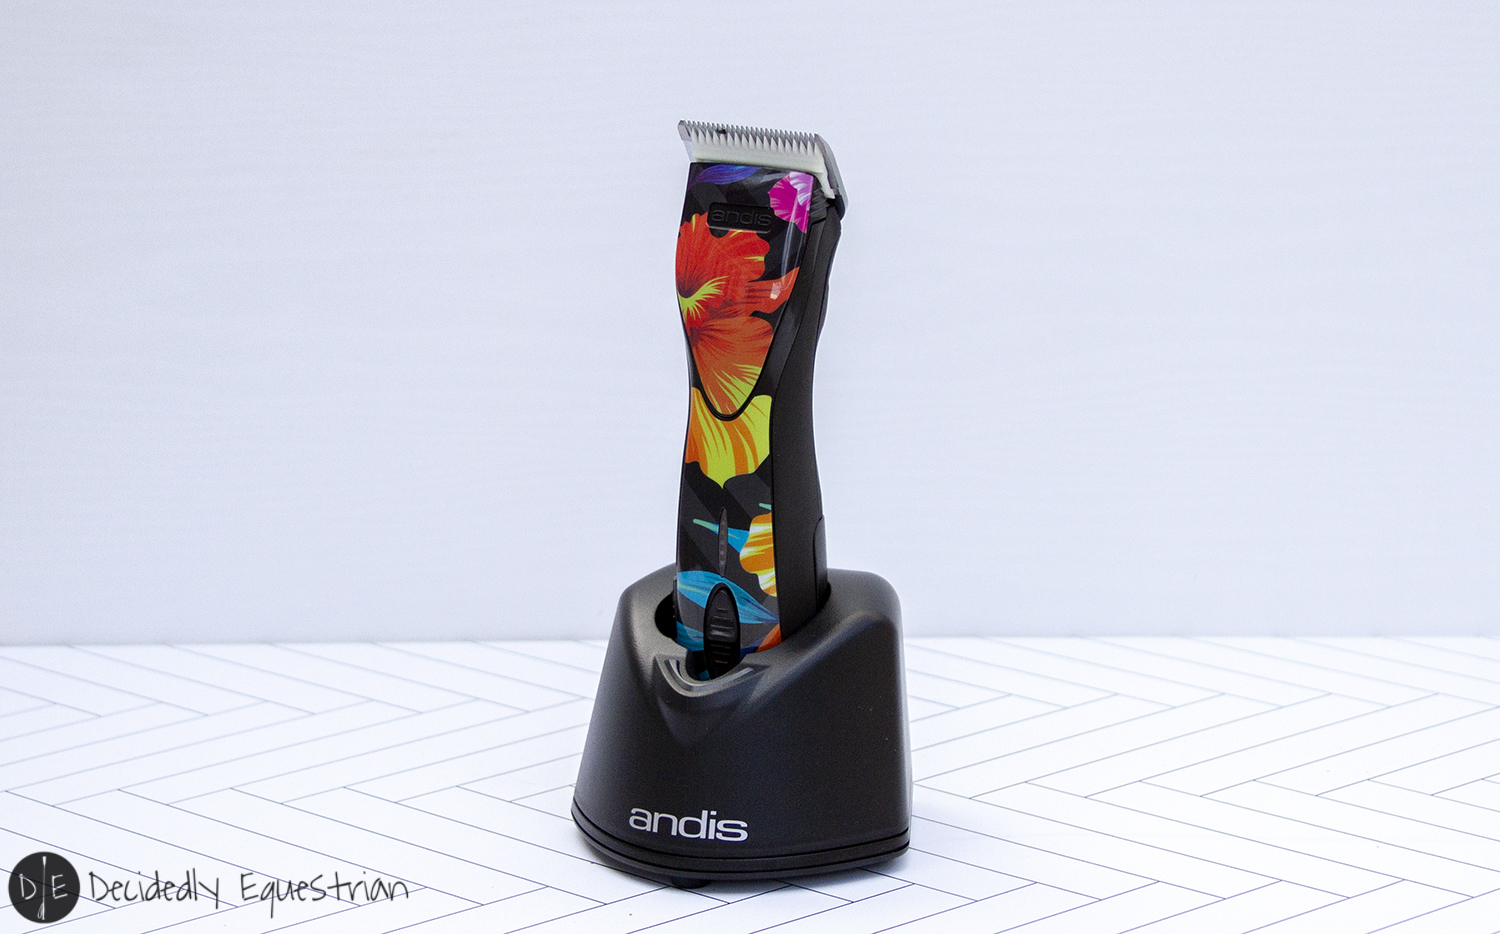 Andis Pulse ZRII 5-Speed Cordless Clippers Review